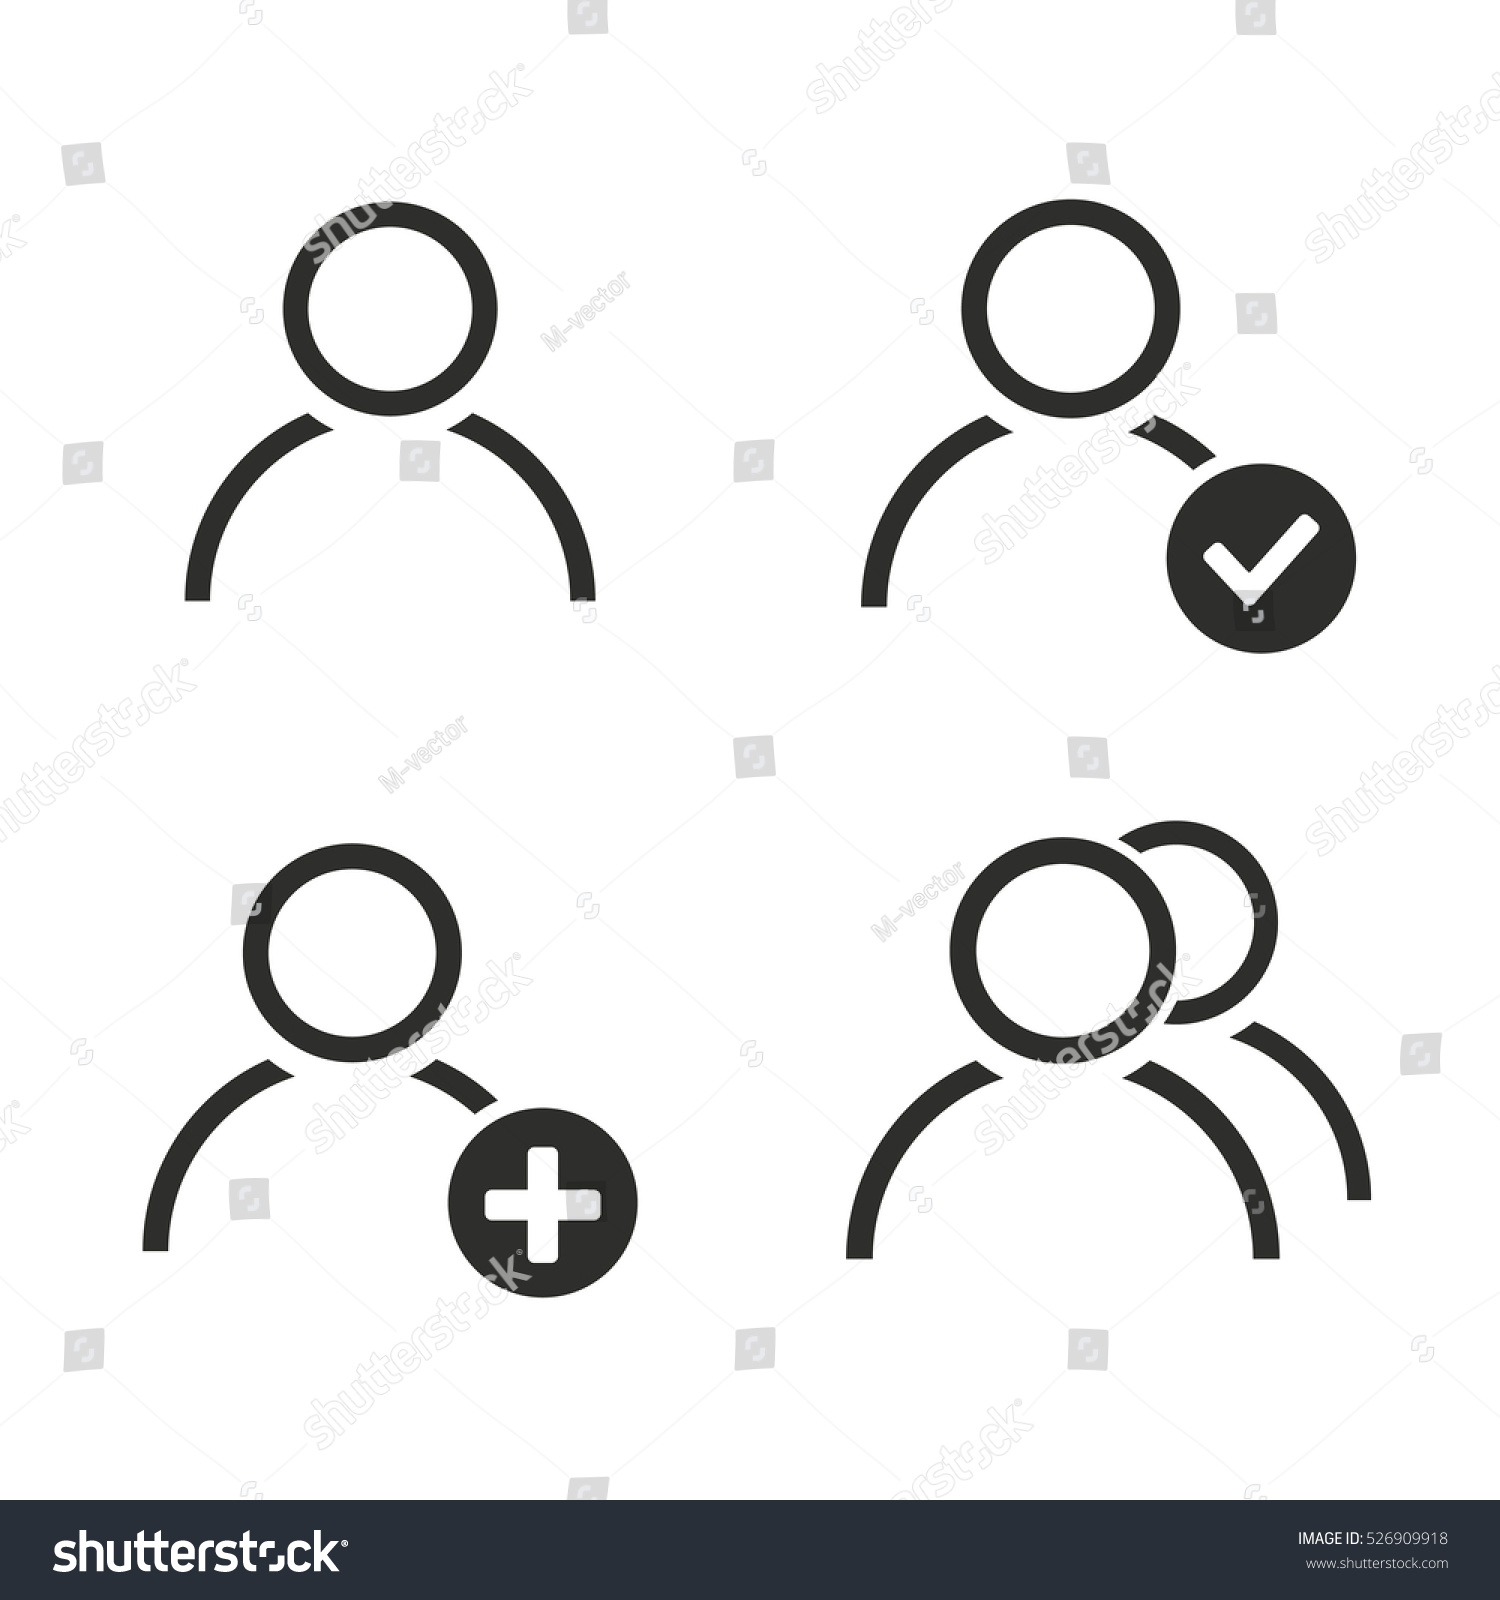 Account vector icons set. Illustration isolated for graphic and web design. #526909918